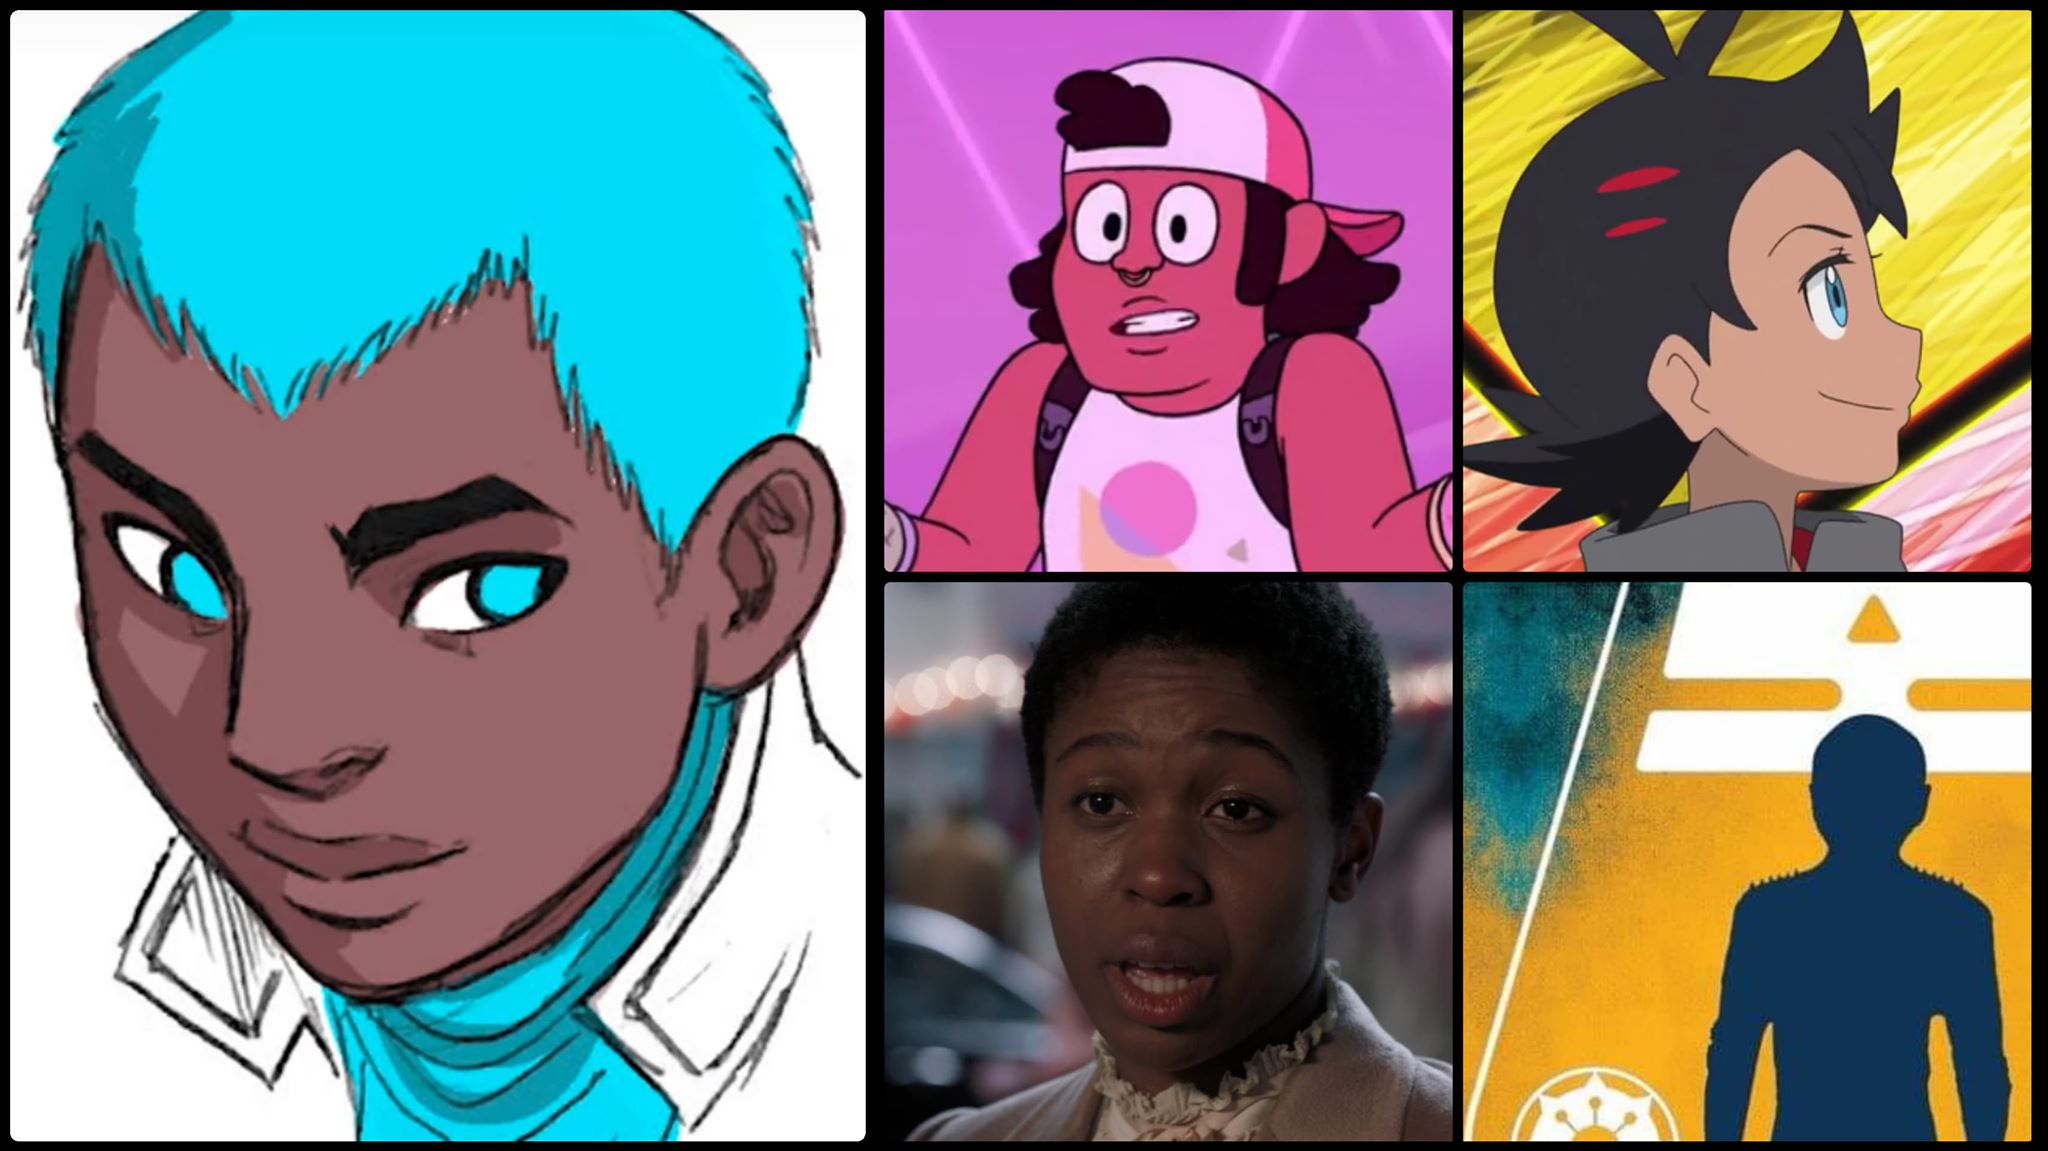 Marvel's regrettably-named nonbinary character, Snowflake is depicted in a sketch on the left. They have dark skin and short blue hair. Their eyes are turned to the right as if they're looking at the four characters we're recommending instead.